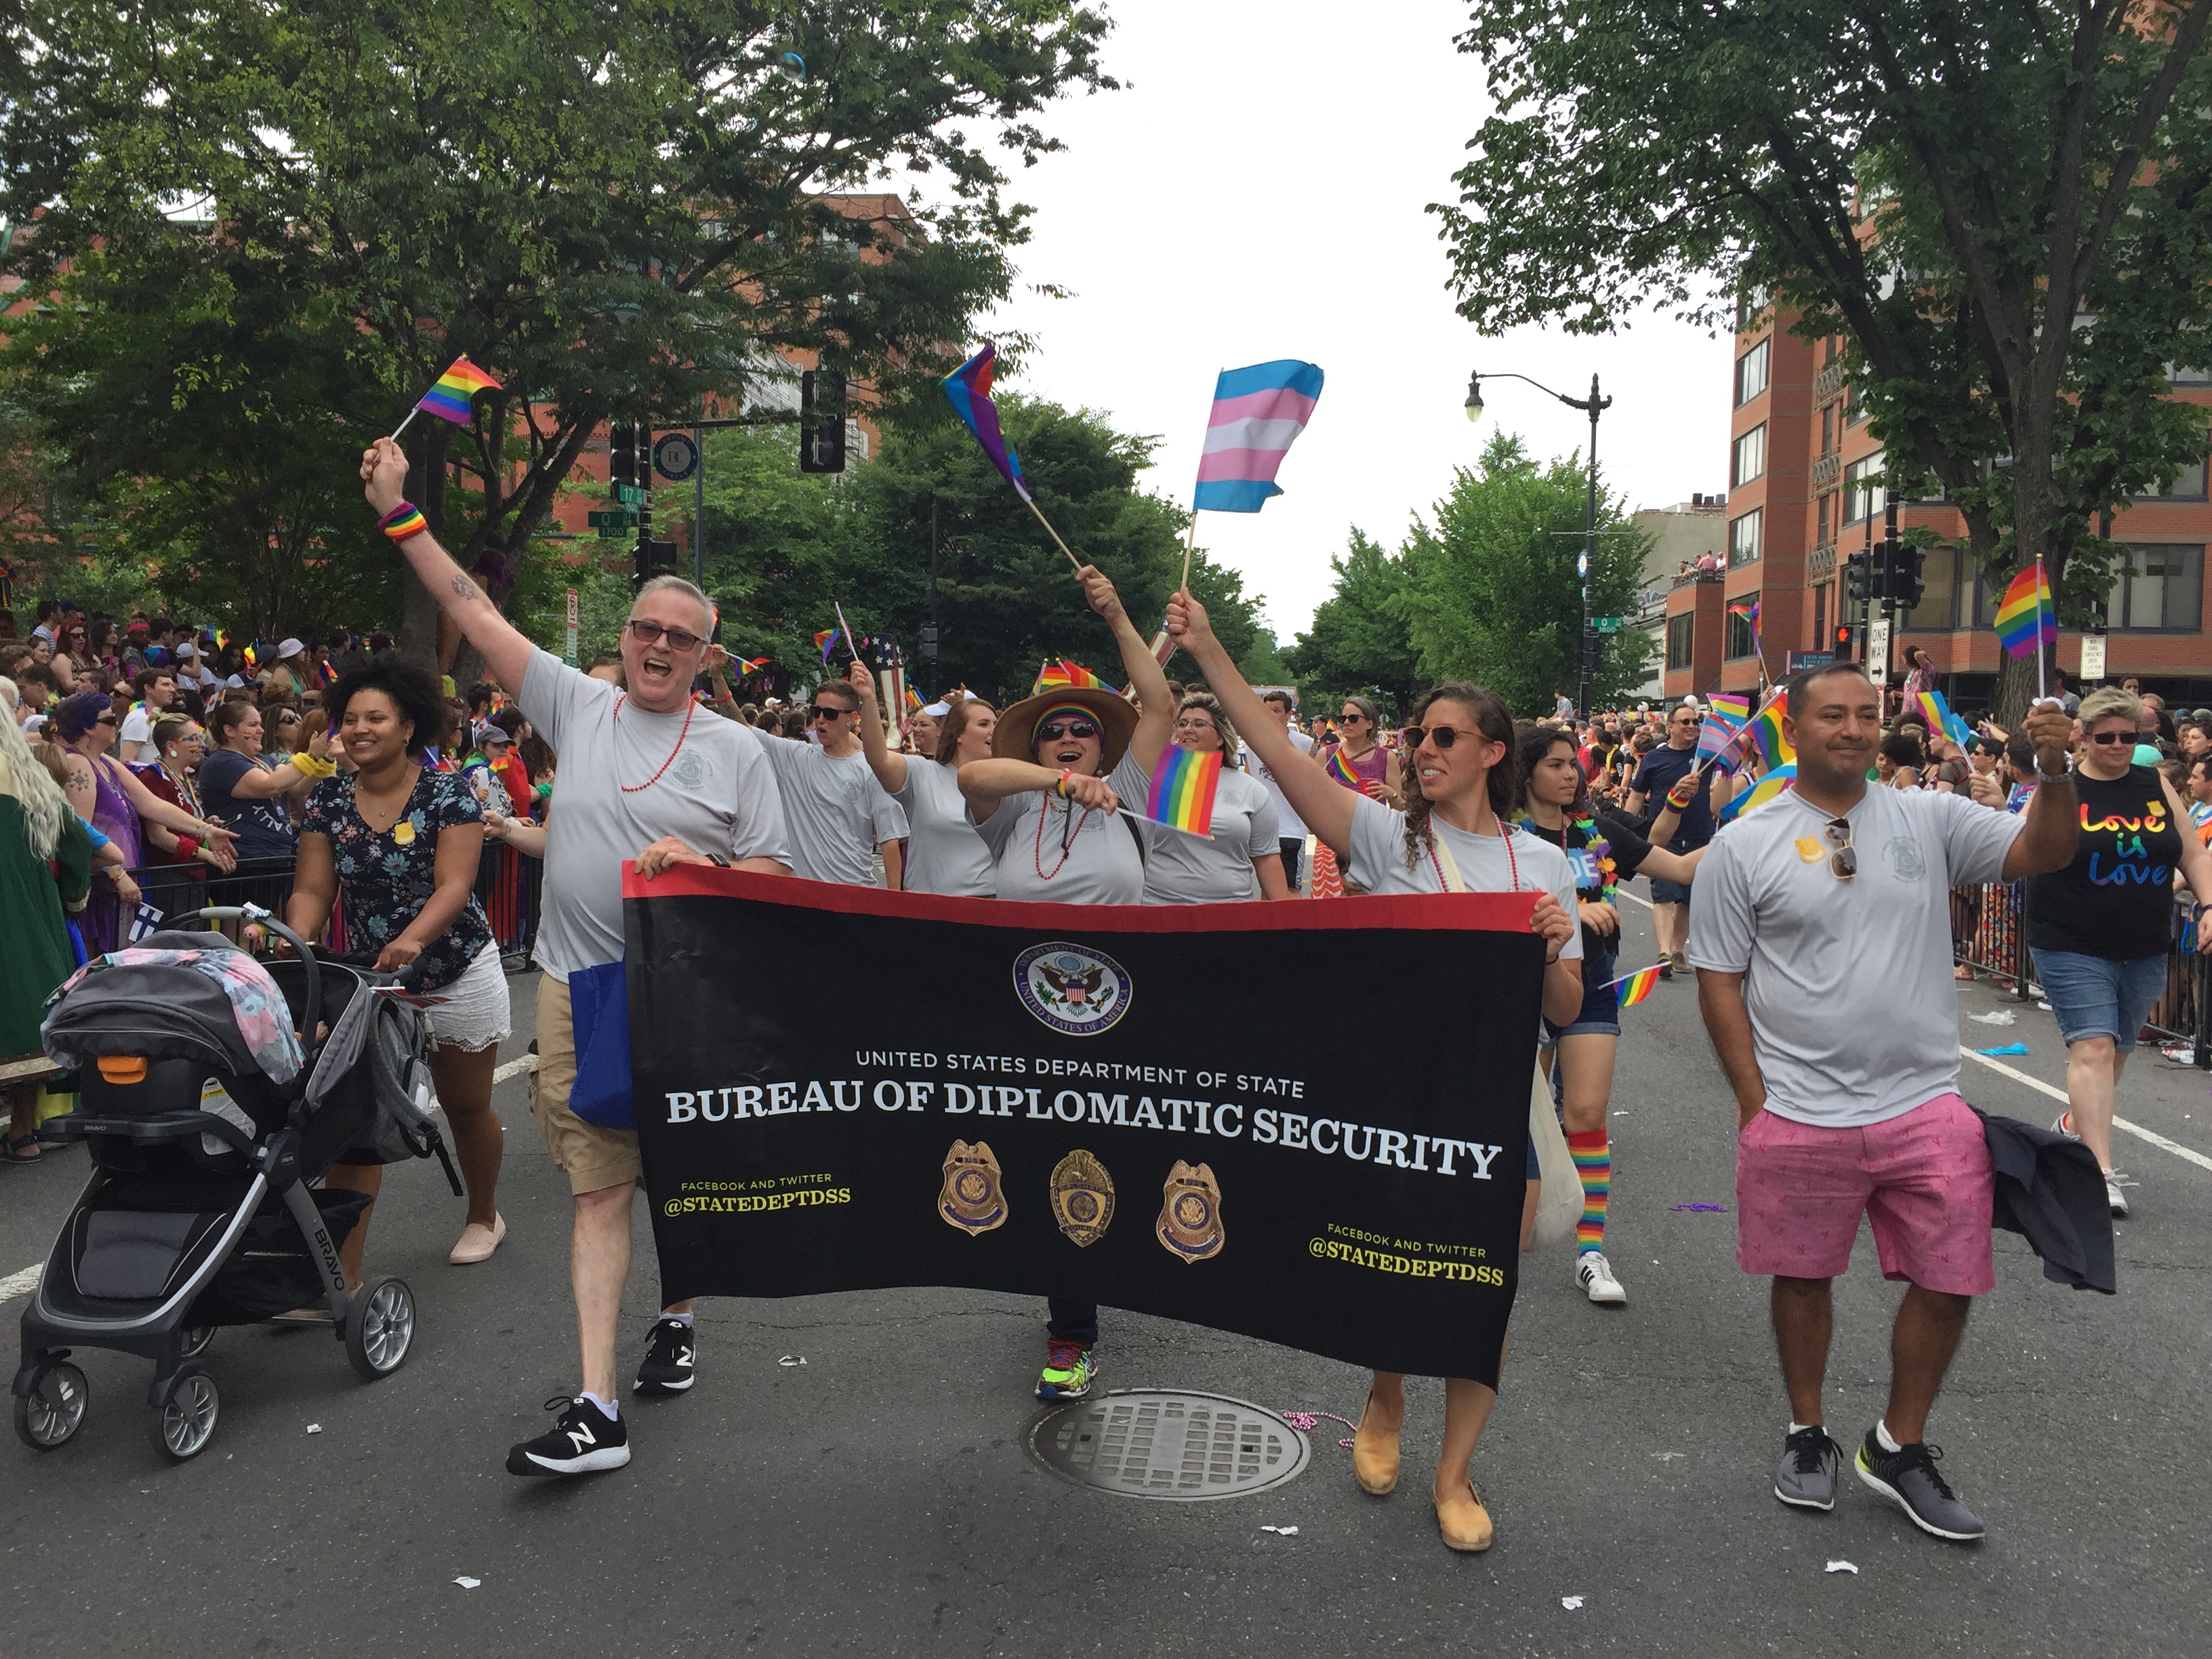 DSS personnel, friends and family members march during the 2019 Capital Pride Parade in Washington, D.C., on June 8, 2019. (U.S. Department of State photo)